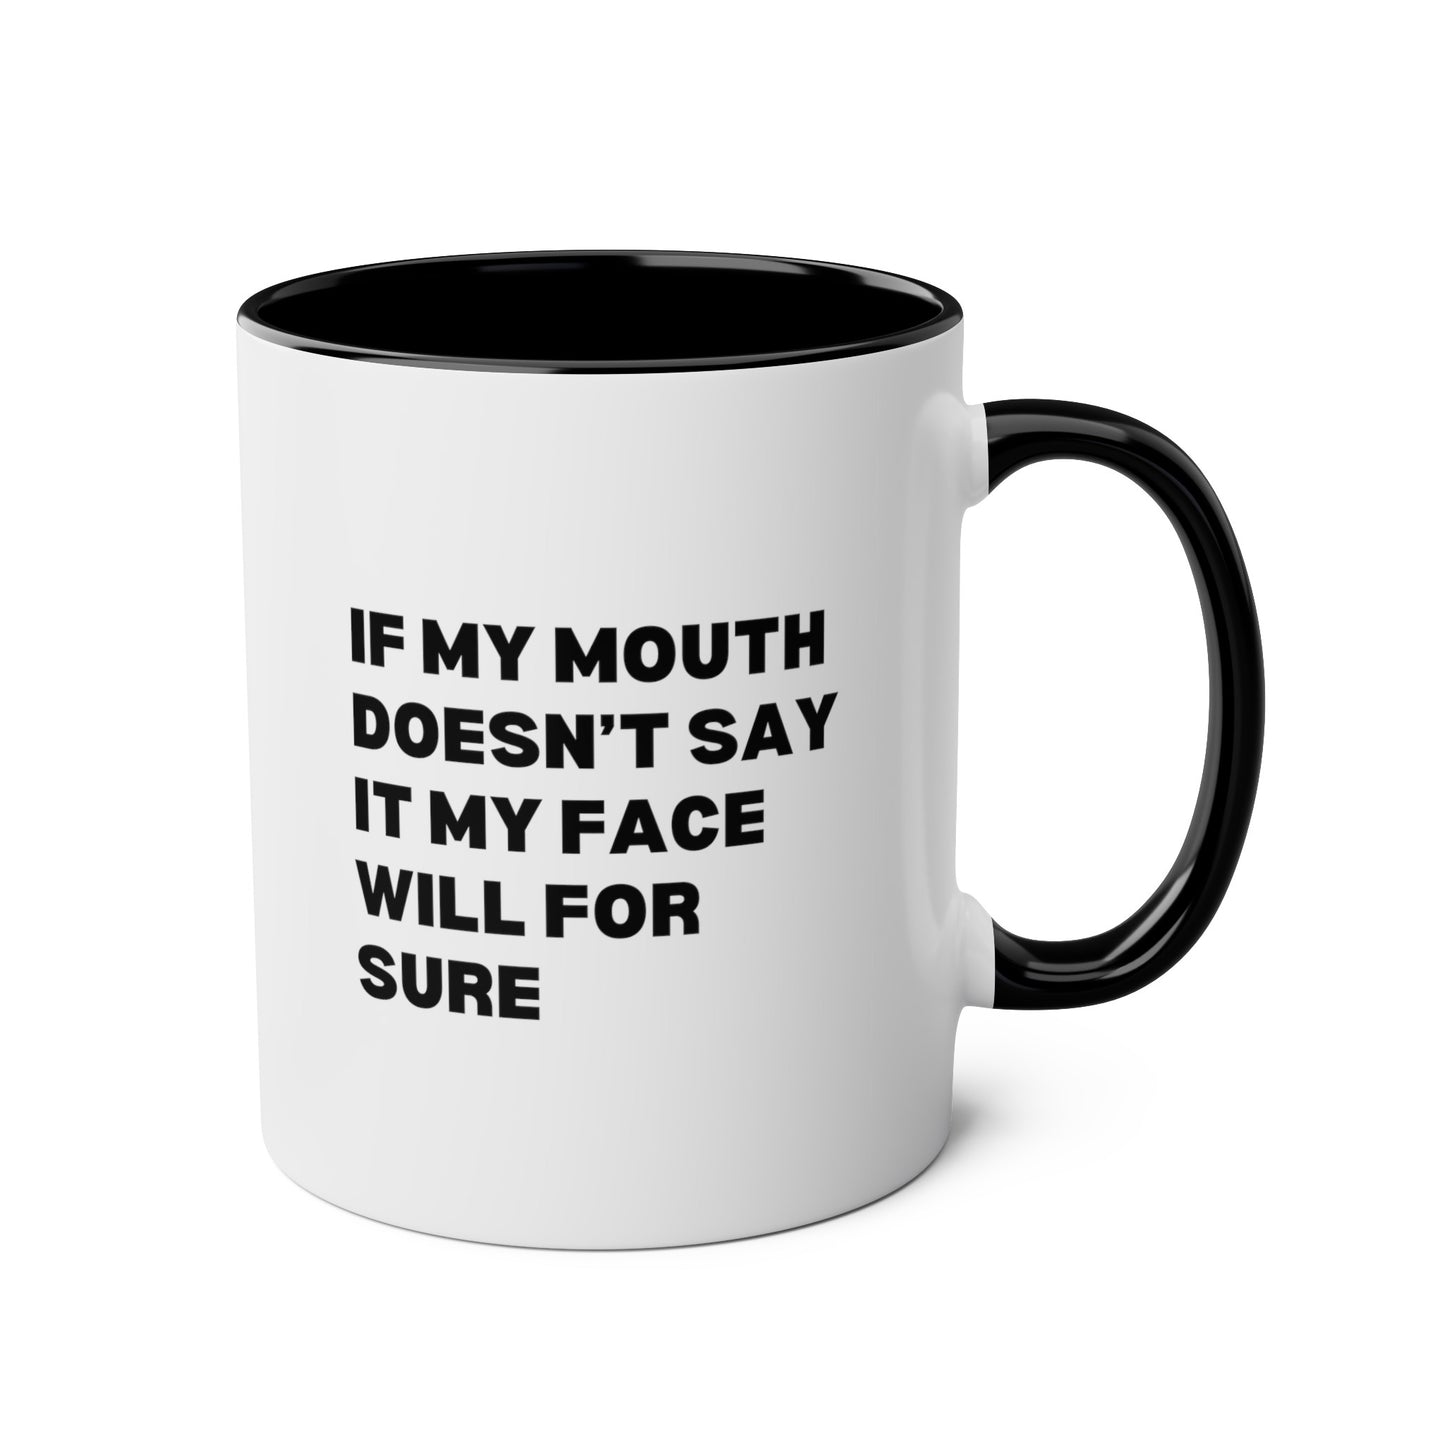 If My Mouth Doesn't Say It My Face Will For Sure 11oz white with black accent funny coffee mug tea cup gift for her best friend office sarcastic sarcasm coworker waveywares wavey wares wavywares wavy wares